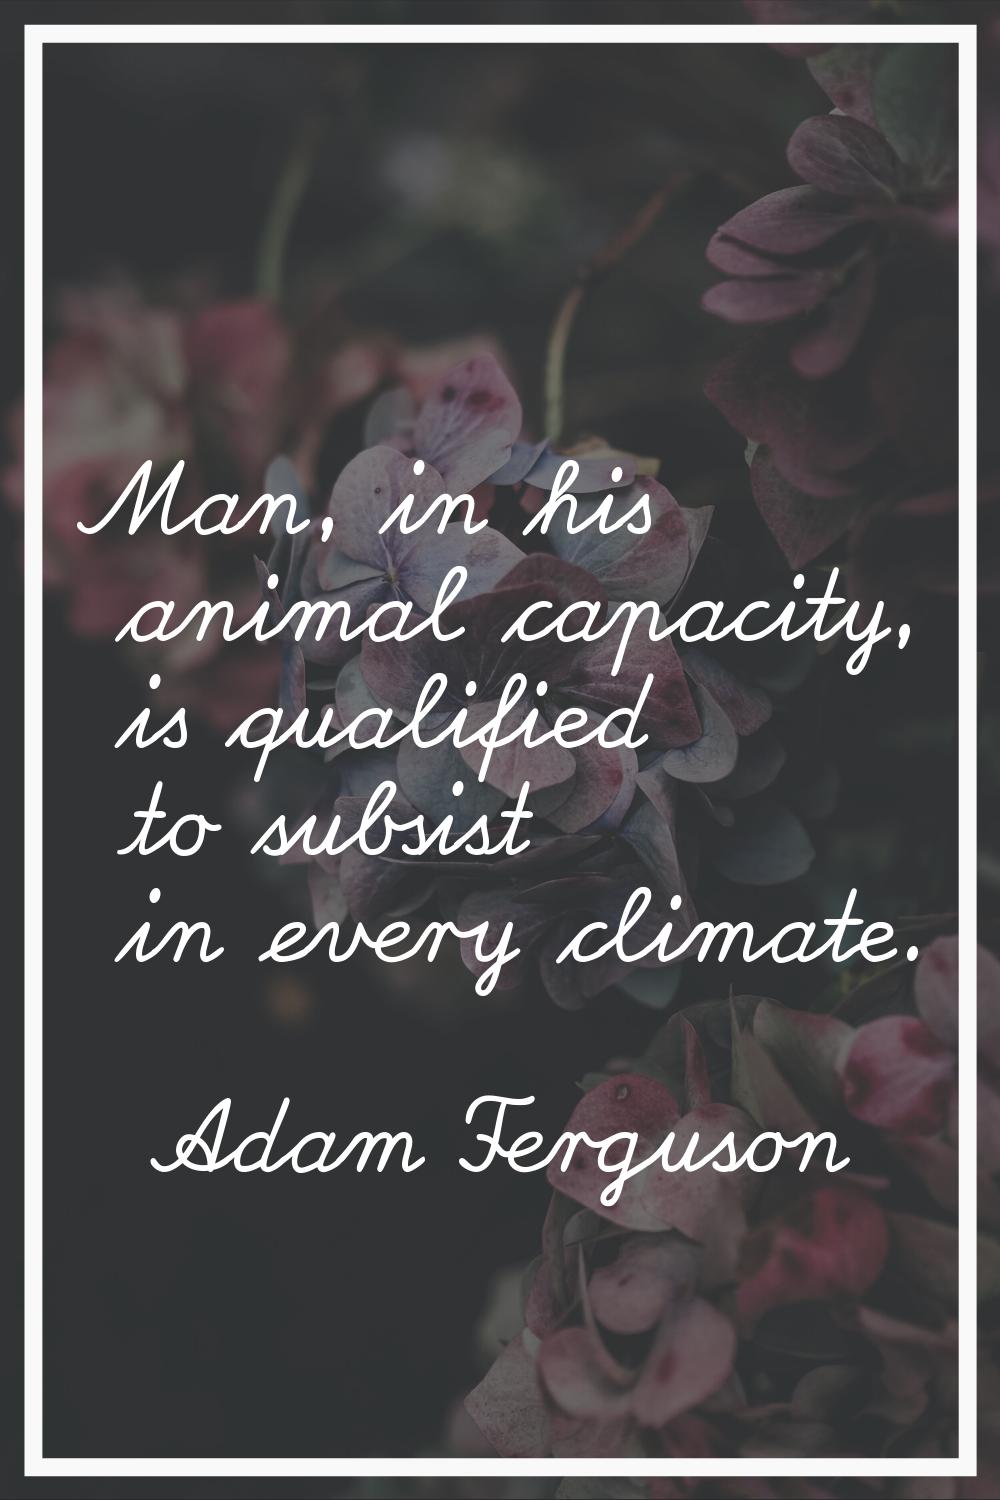 Man, in his animal capacity, is qualified to subsist in every climate.